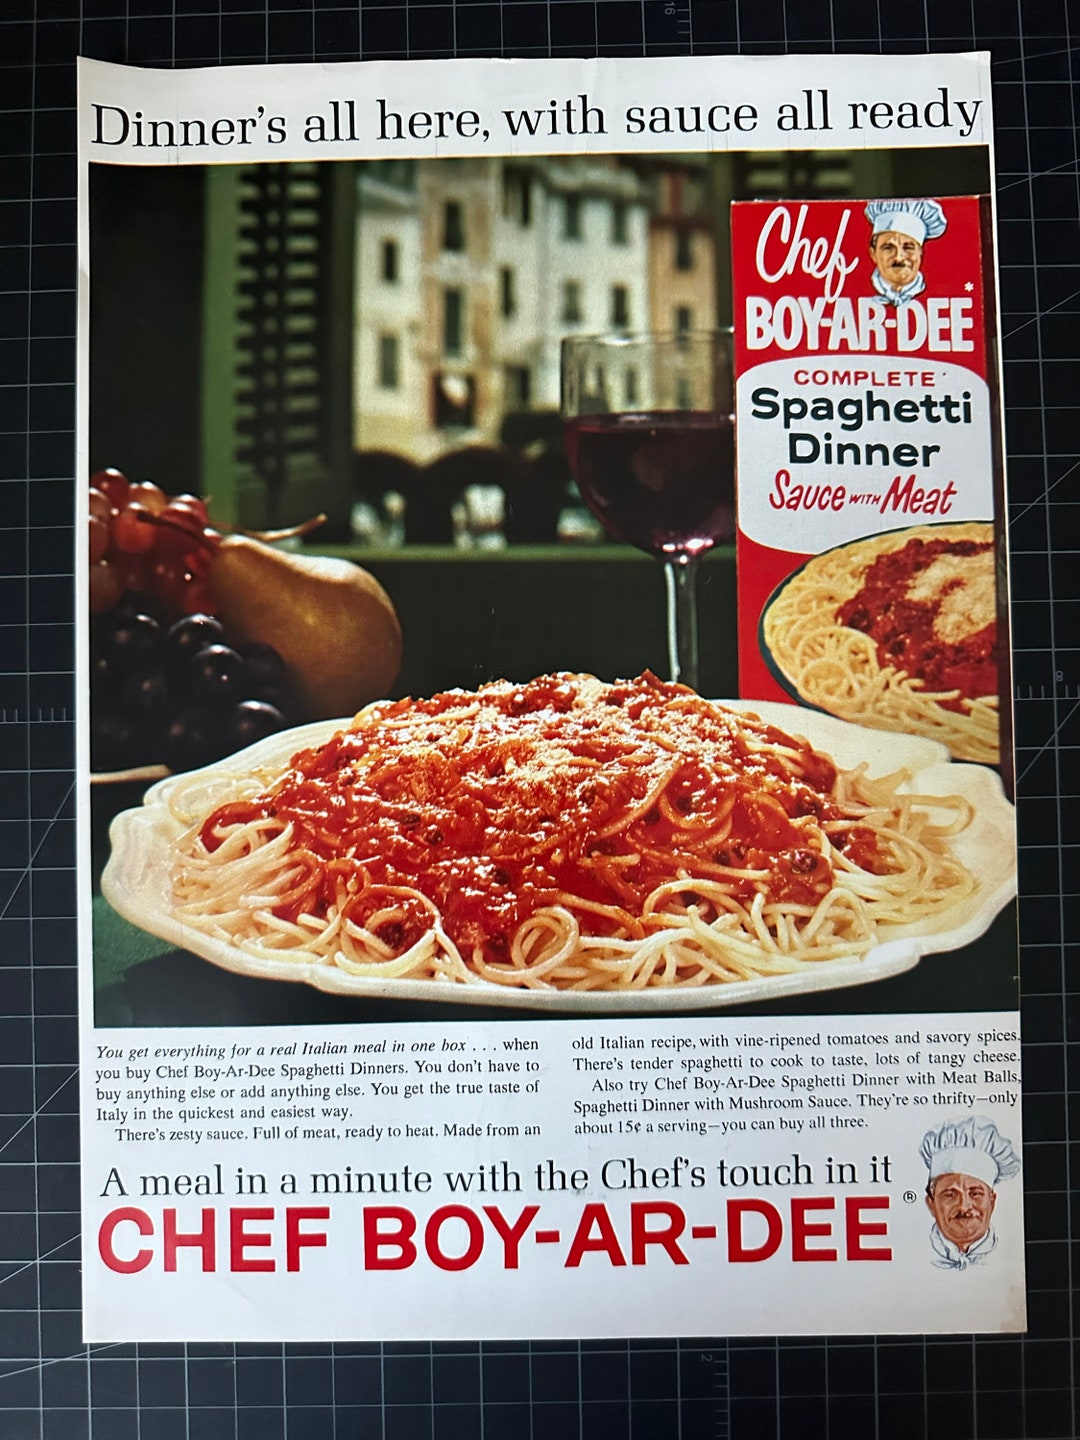 Vintage Print Ad 1960's Chef Boy-Ar-Dee Complete Cheese Pizza Sausage Box  Dinner